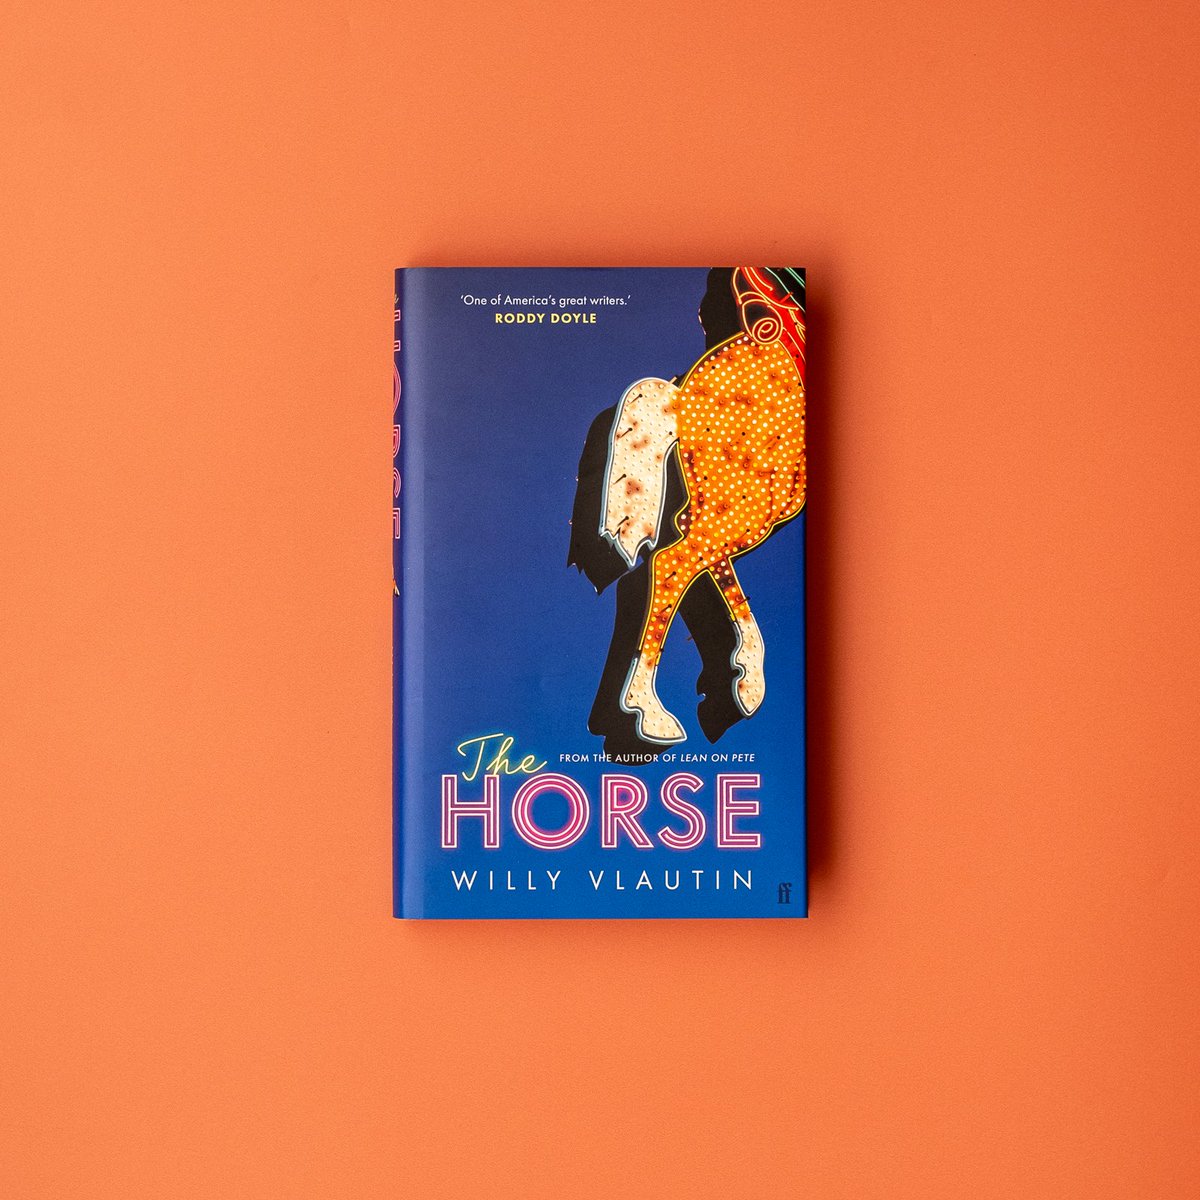 The Horse is out today - Willy Vlautin's most personal novel yet. A story about songwriting, shattered lives and a second chance. 'Both a work of extraordinary compassion and a really great novel.' Ann Patchett 'A bruised and beautiful instant classic.' Ben Myers